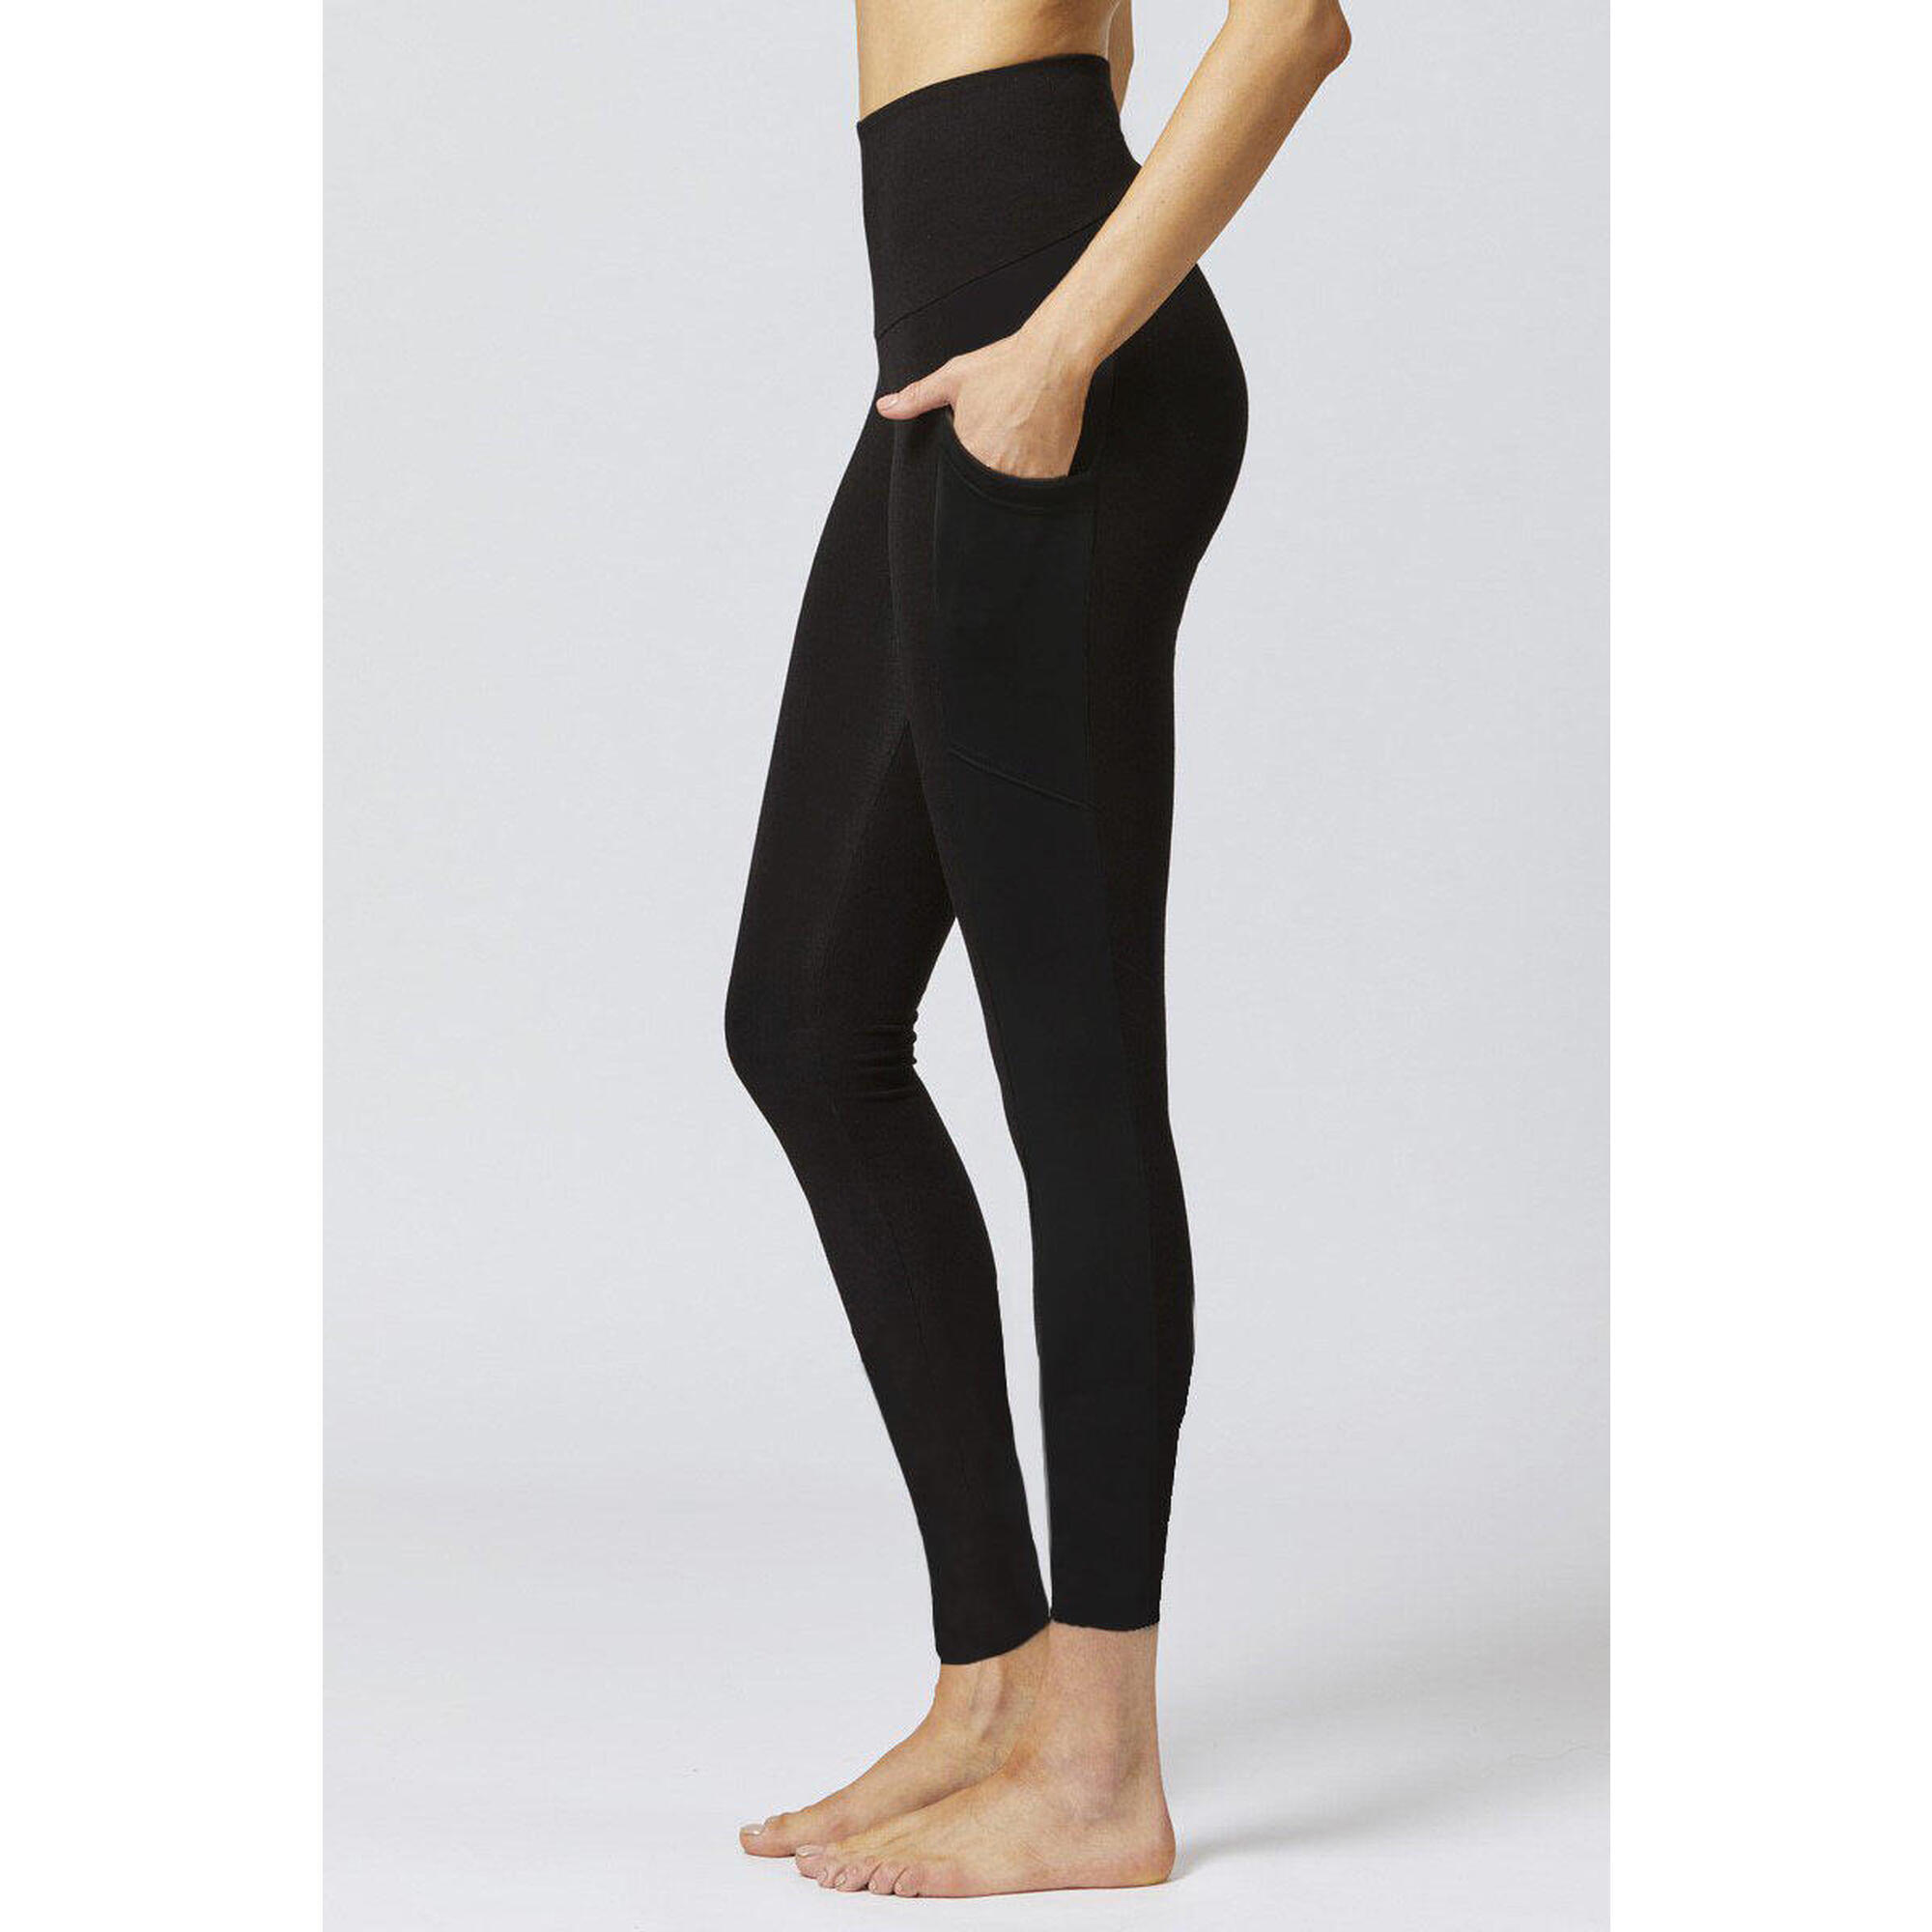 TLC SPORT Extra Strong Compression Tummy Control Leggings with Side Pockets Black